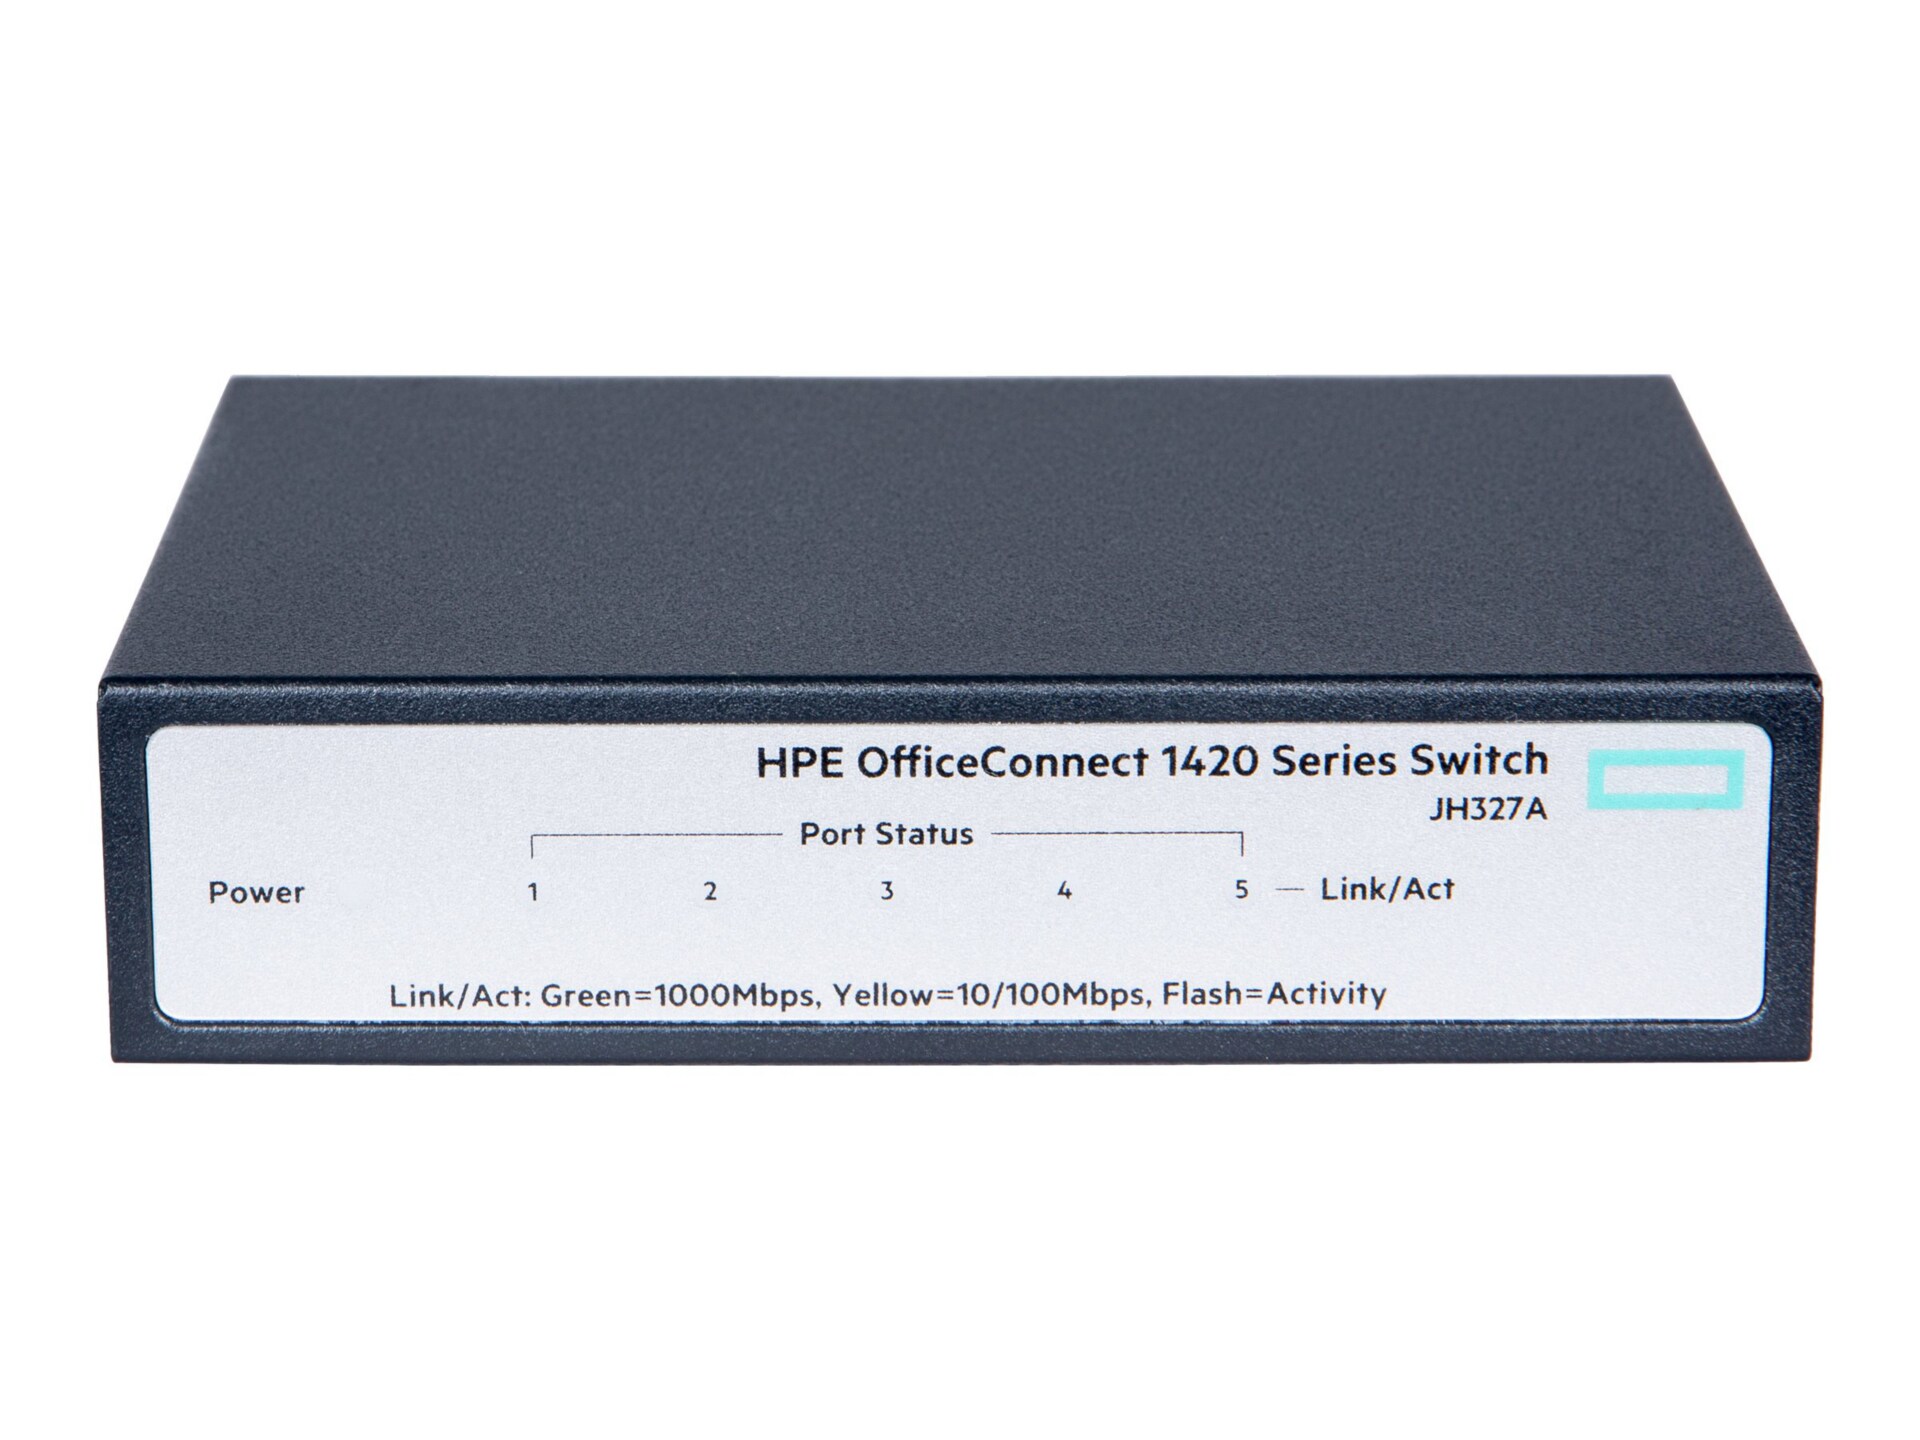 HPE OfficeConnect 1420 5g - switch - 5 ports - unmanaged